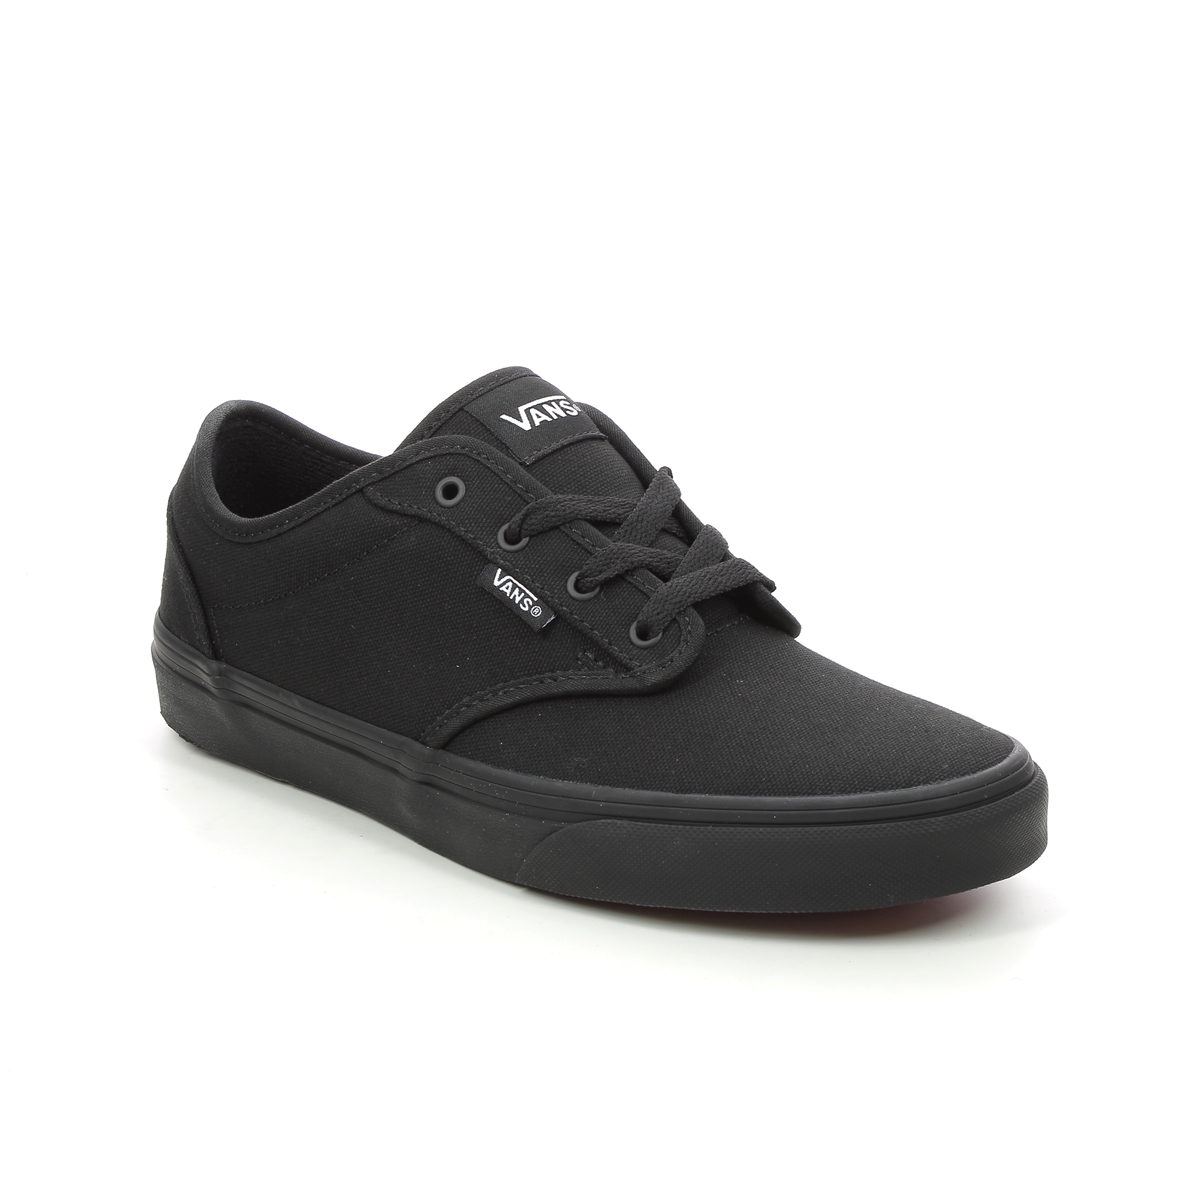 Vans Atwood Youth VKI5186 Black trainers